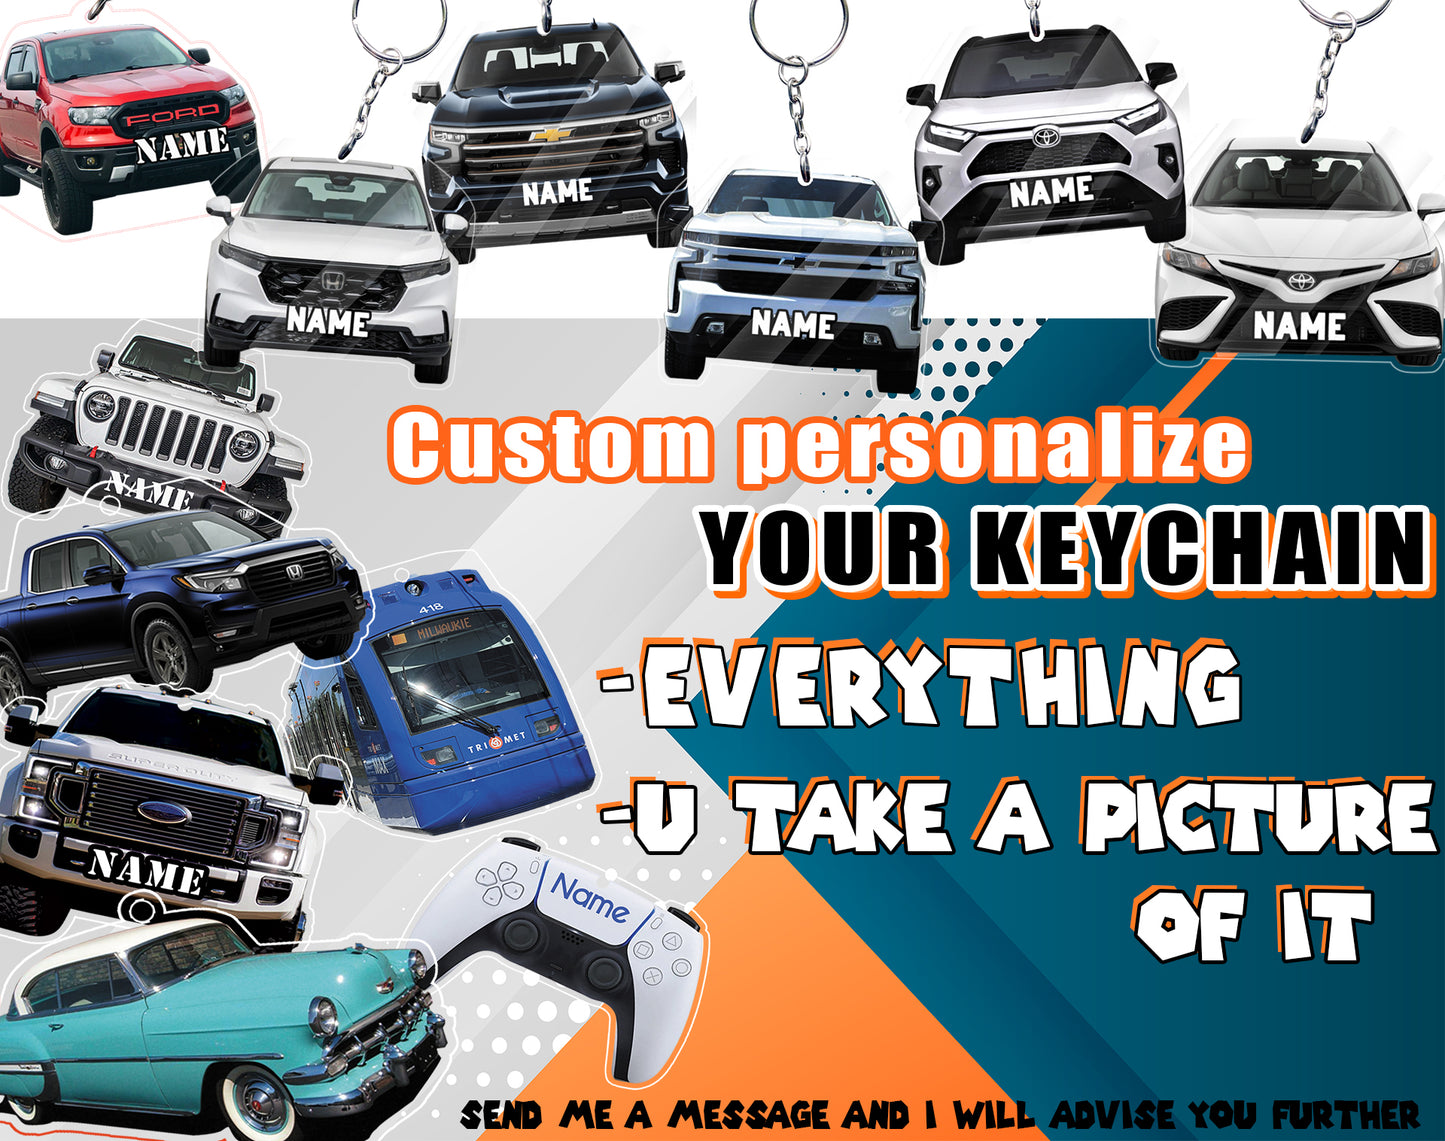 Transparent Acrylic Keychain - CAMRY  (Personalizable)